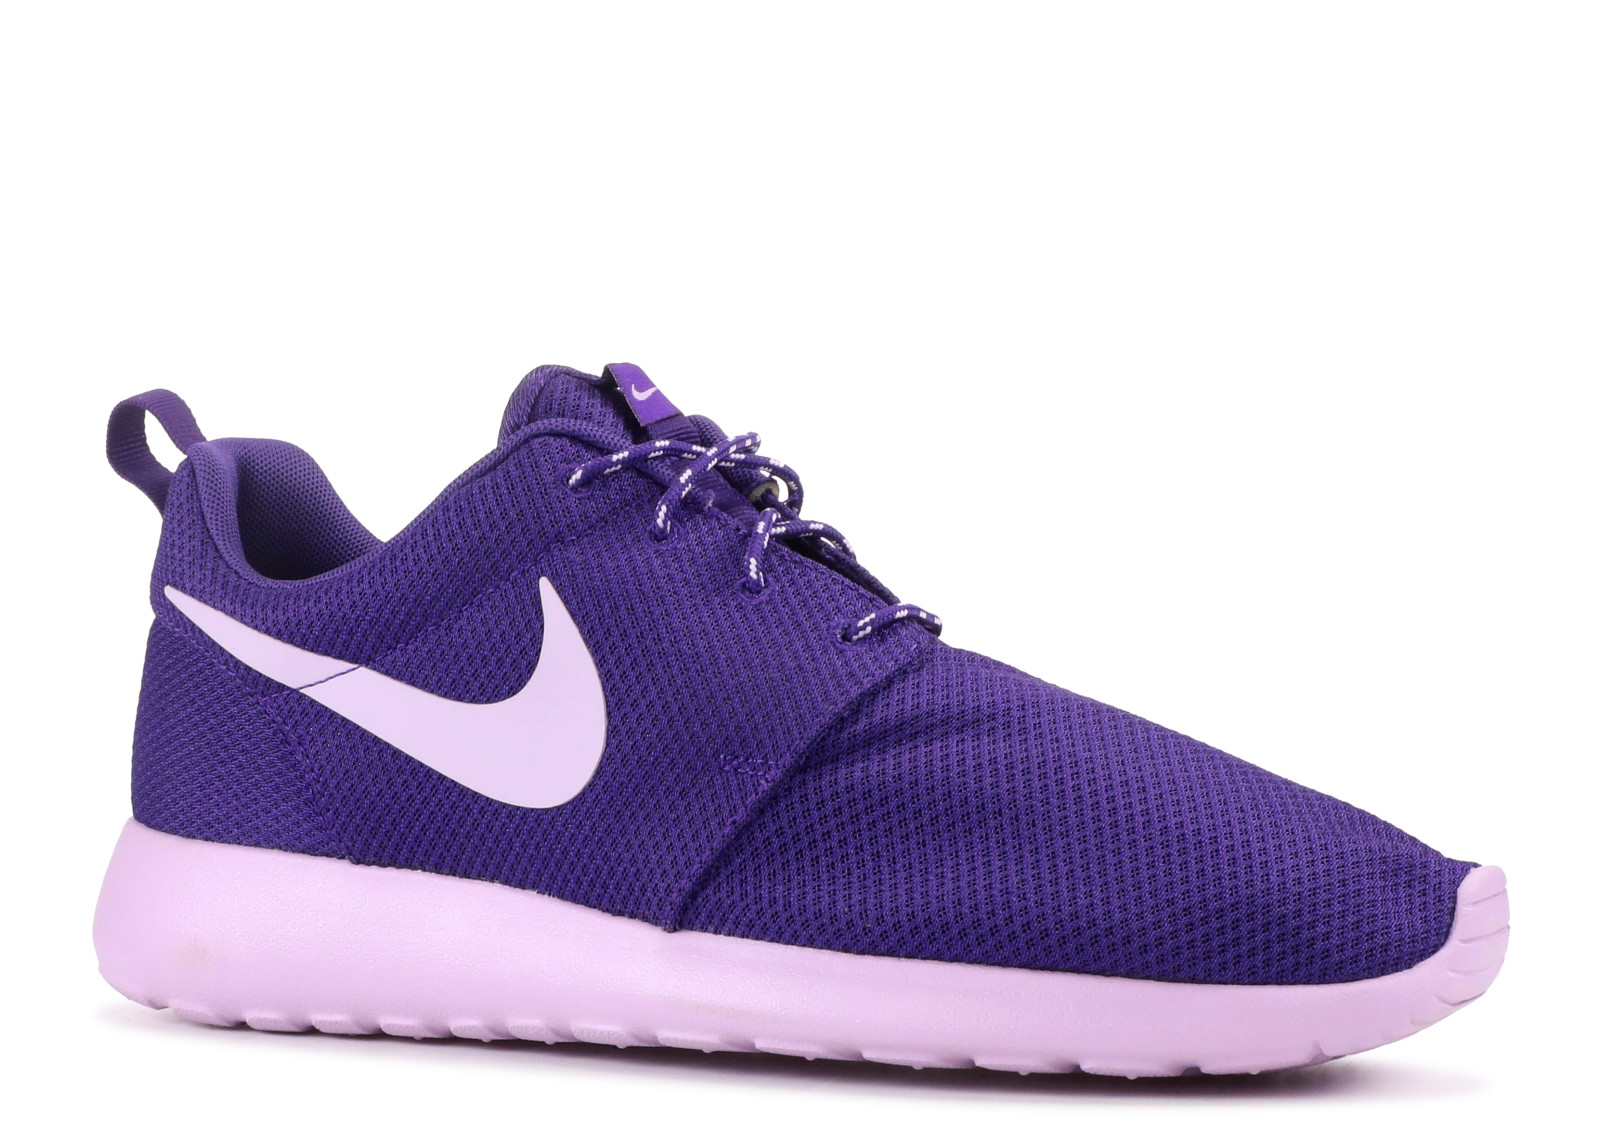 GmarShops - 503 - up with the neutral hue movement of the moment is the - Womens Roshe Run Purple Wash Volt Court Violet 511882